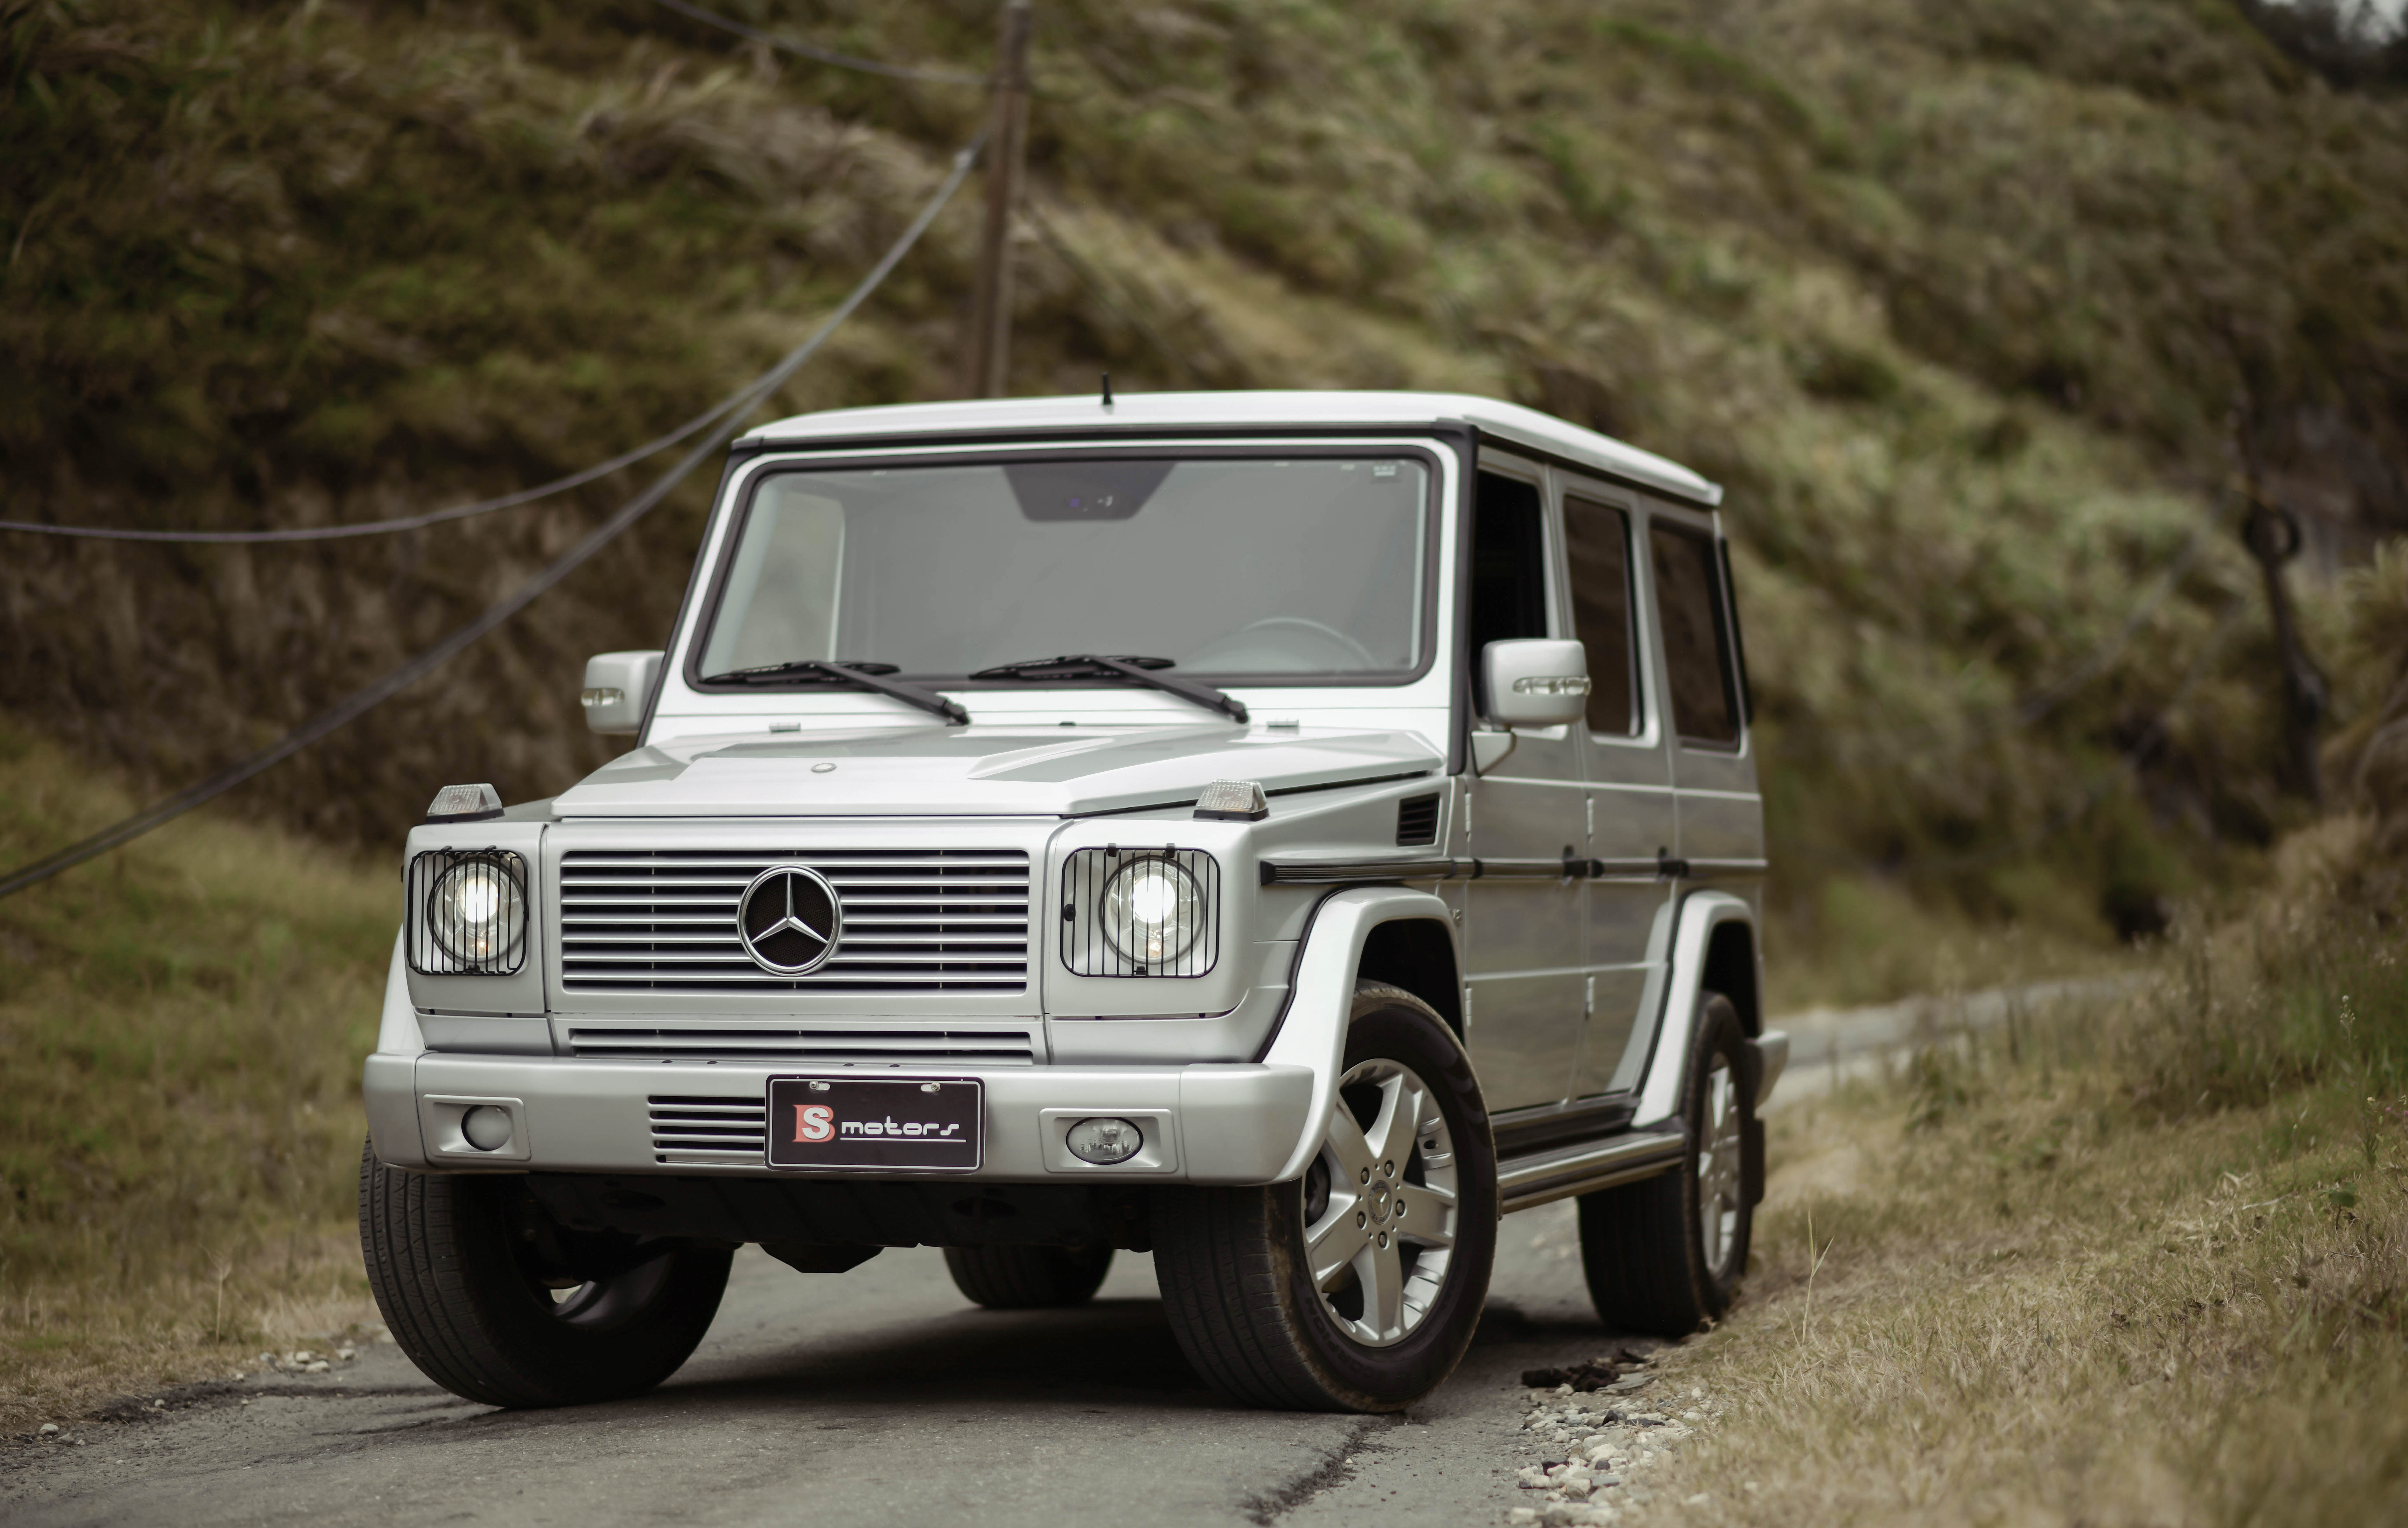 106414 Screensavers and Wallpapers Silvery for phone. Download cars, car, suv, front view, machine, grey, mercedes-benz, silver, silvery, mercedes-benz g500 pictures for free